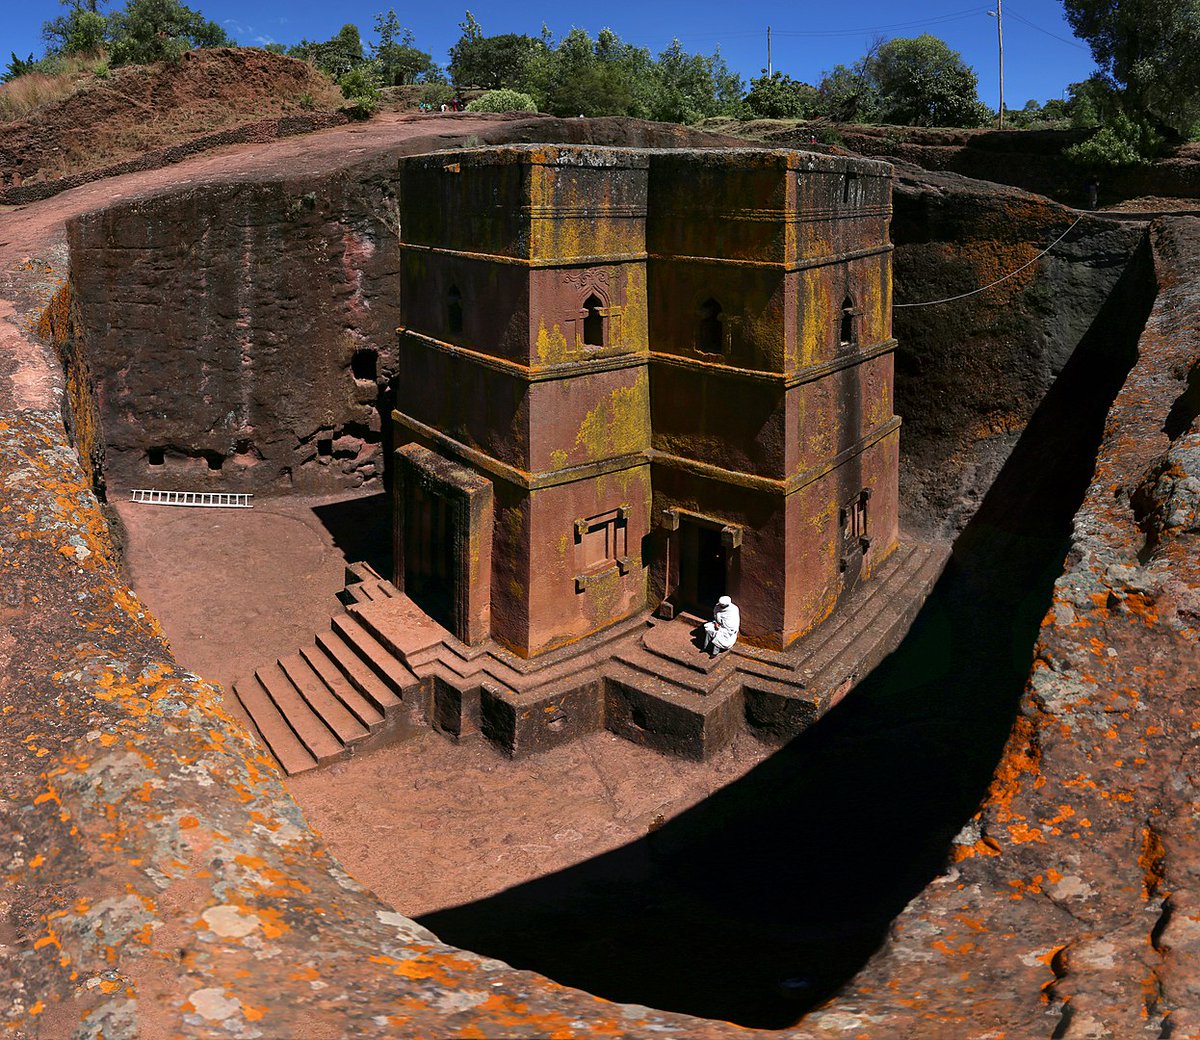 But there is more than one way to build underground.

Take the rock-cut churches of Lalibela in Ethiopia, built in the Middle Ages by King Gebre Meskel as his own version of the Holy City of Jerusalem.

Churches hewn from the rock itself — this is architecture in reverse.